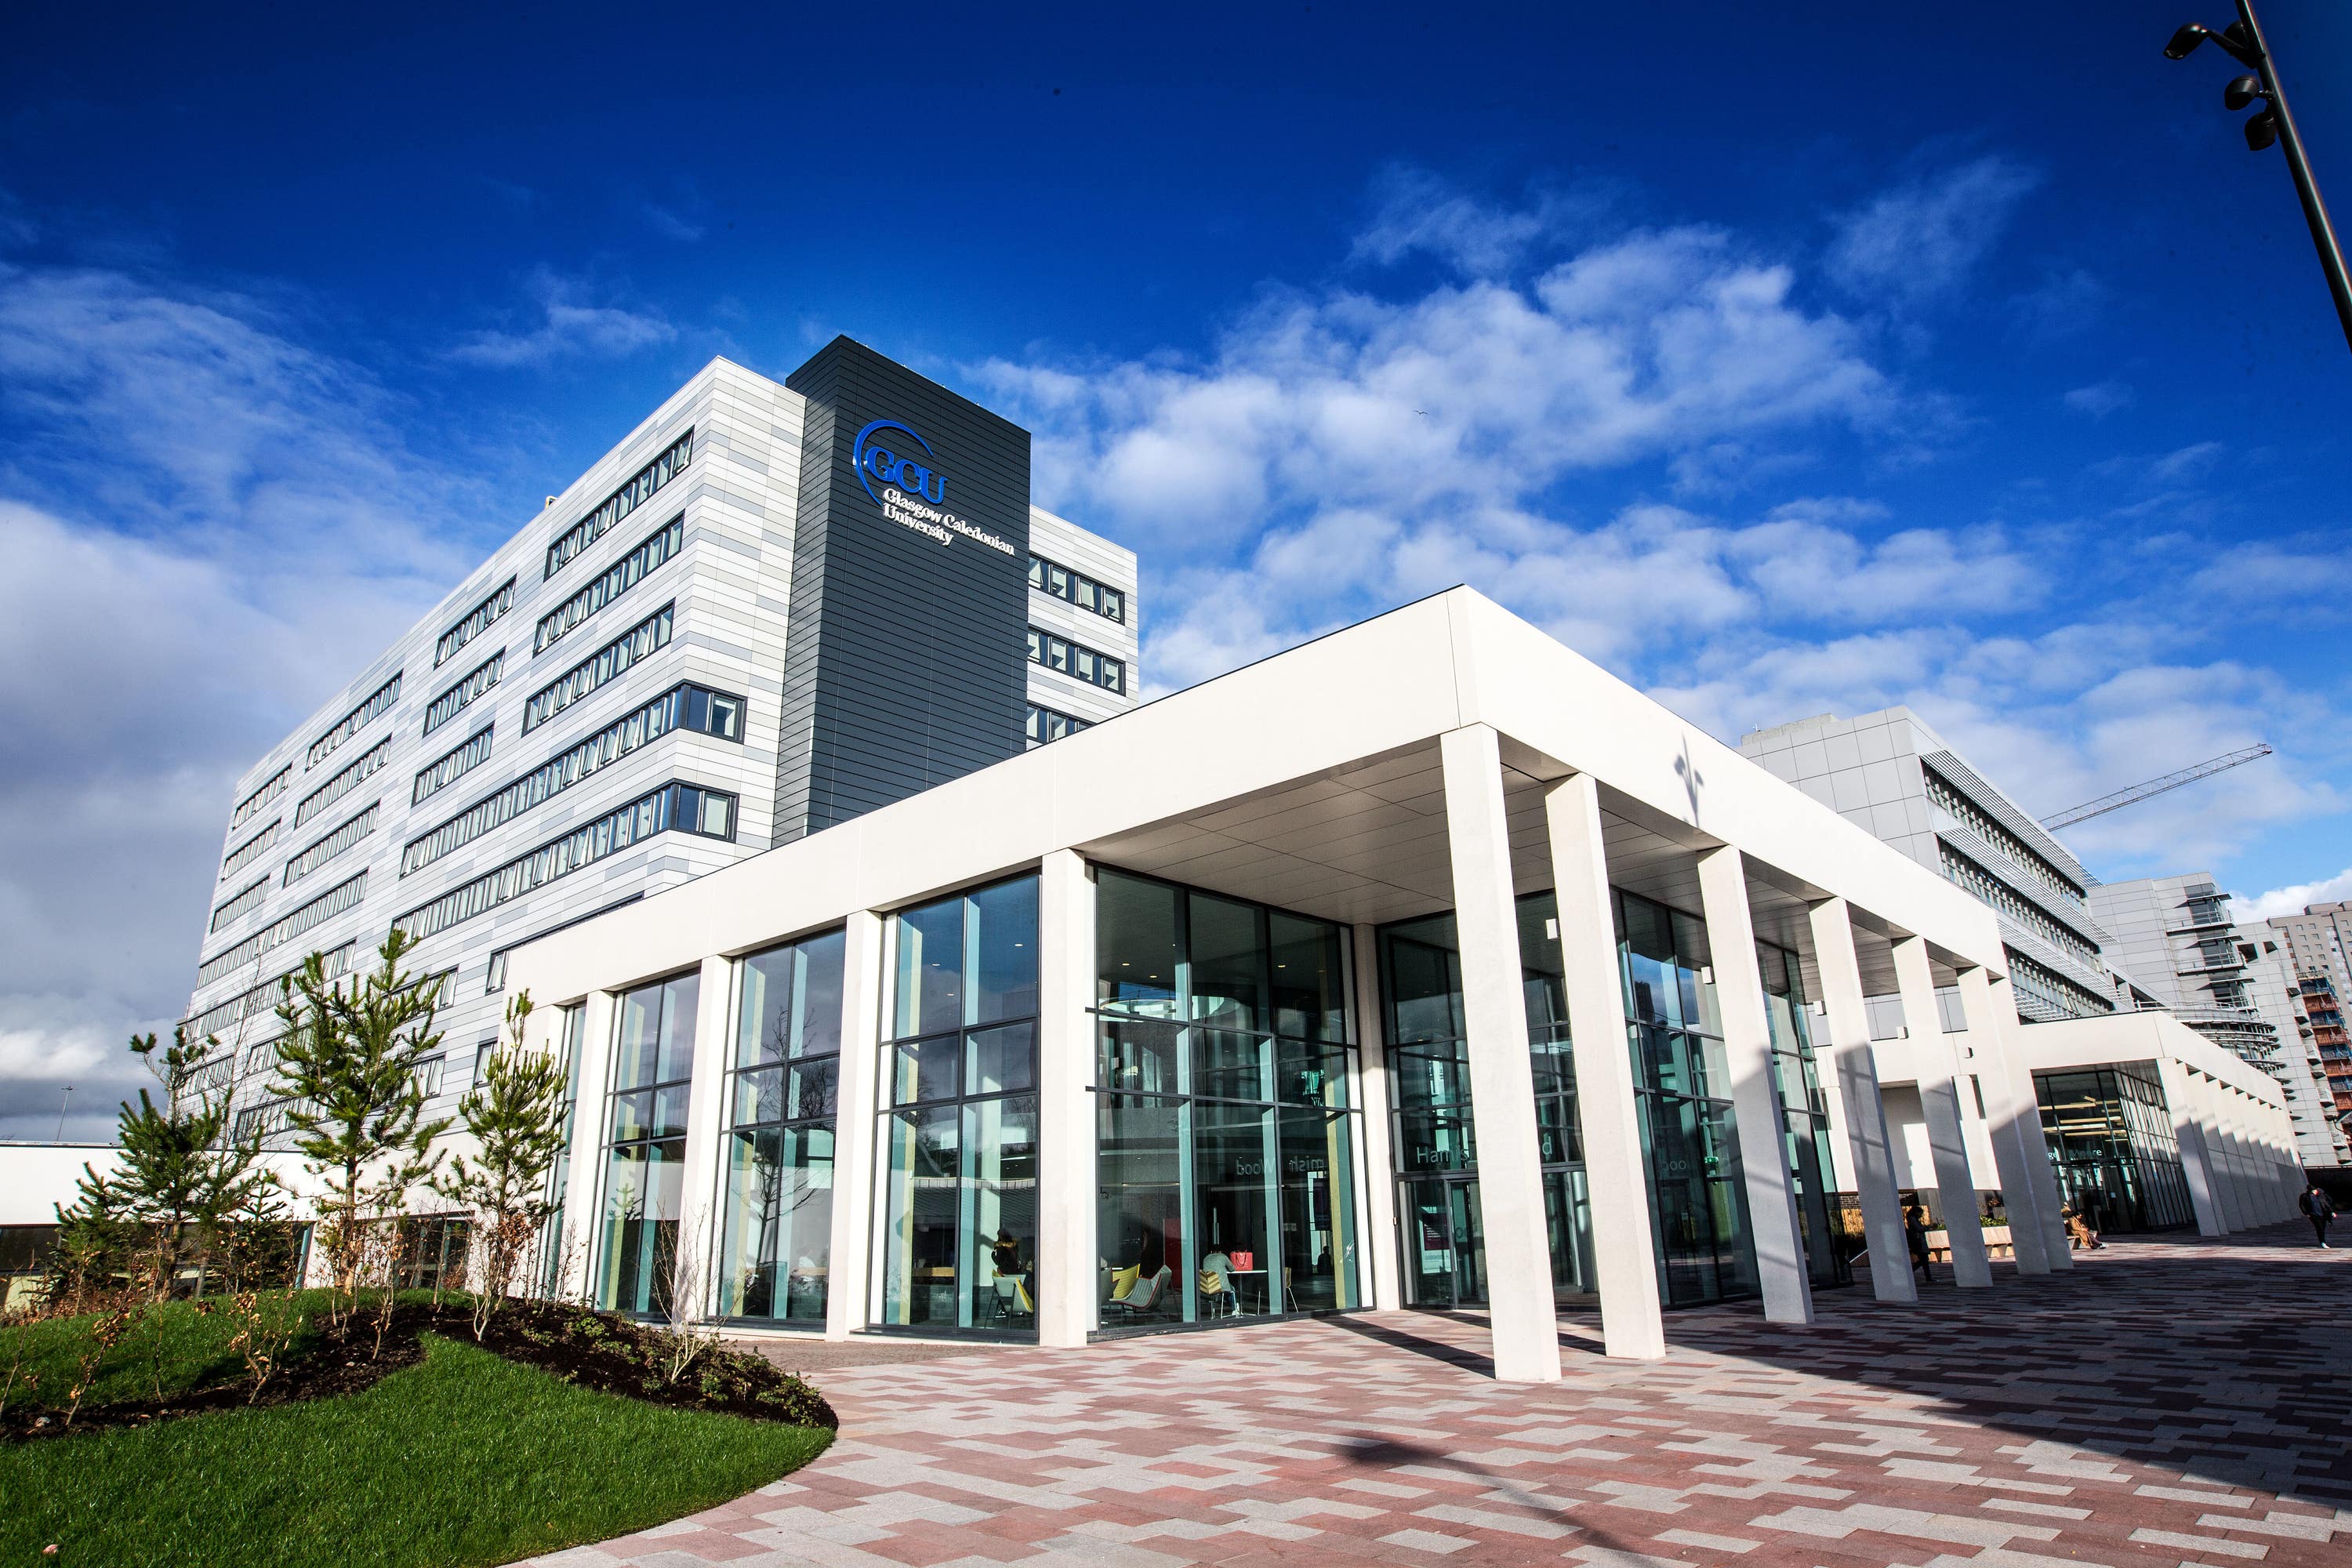 The Glasgow Caledonian University campus in Glasgow city centre.